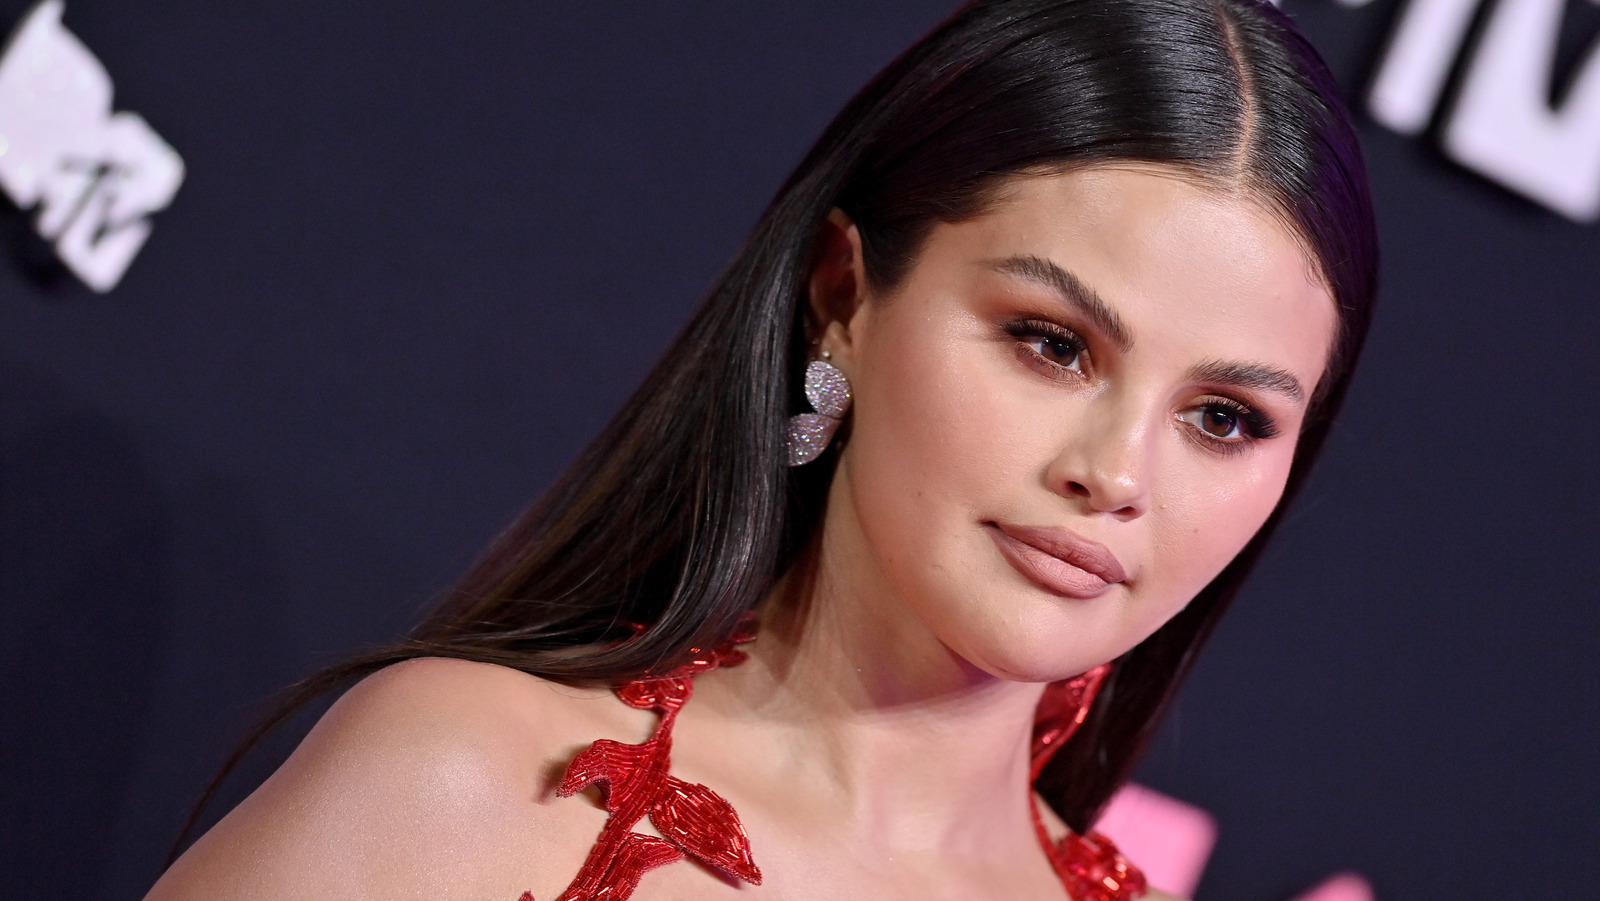 Selena Gomez Says She 'Didn't Feel Good About My Body' at the 2015 Met Gala